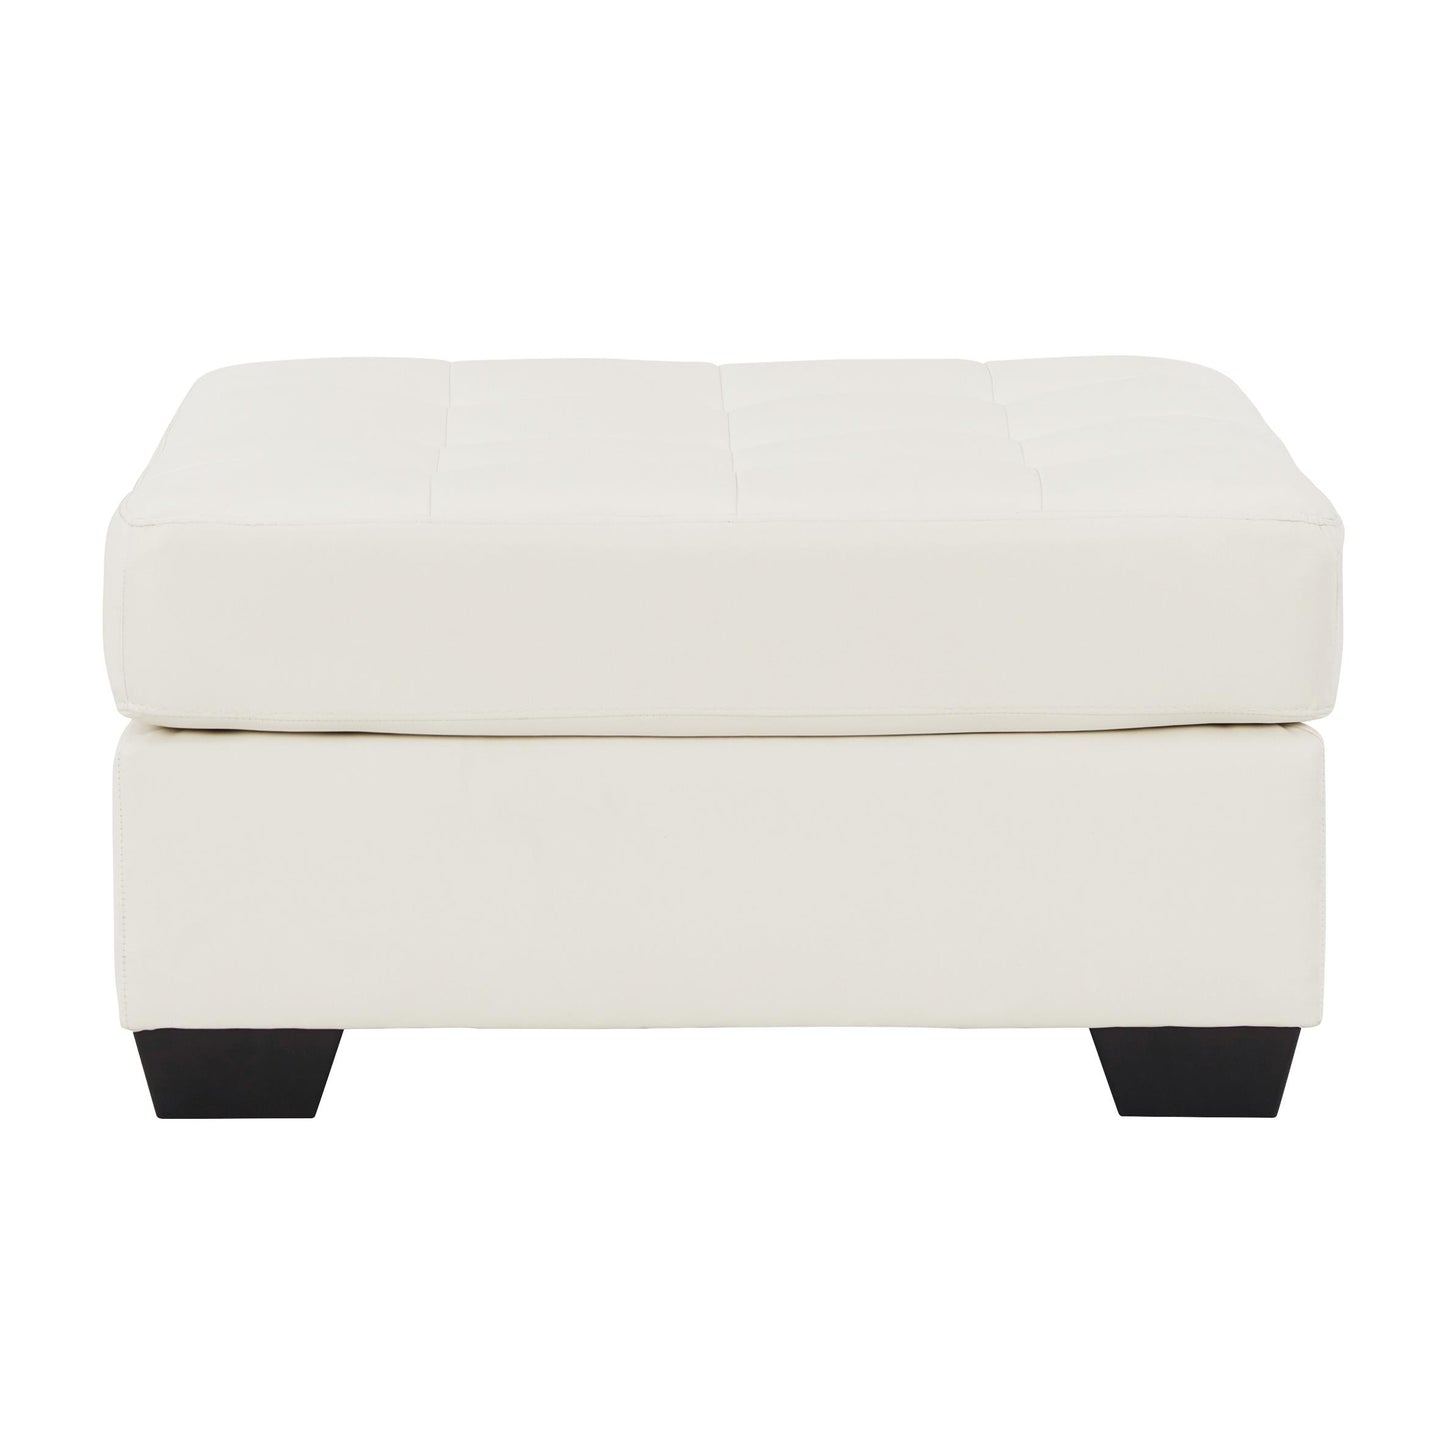 Signature Design by Ashley Donlen Leather Look Ottoman 5970308 IMAGE 2